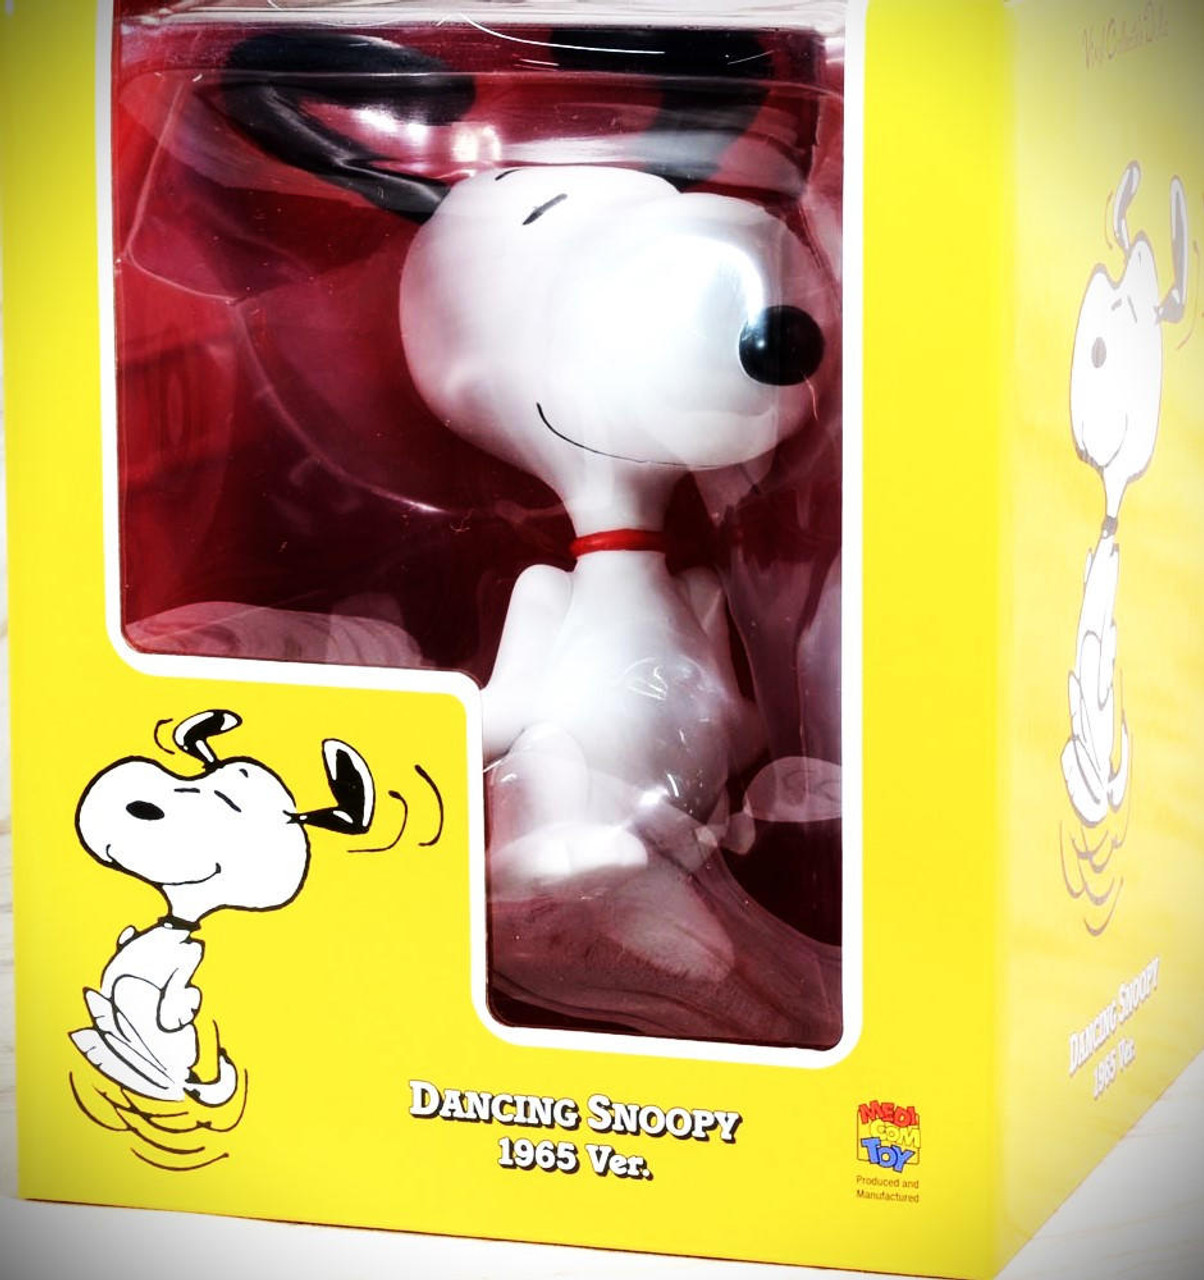 https://cdn11.bigcommerce.com/s-cy4lua1xoh/images/stencil/1280x1280/products/26639/233321/peanuts-hopping-snoopy-vcd-figure-medicom-toys__13868.1689714942.jpg?c=1?imbypass=on